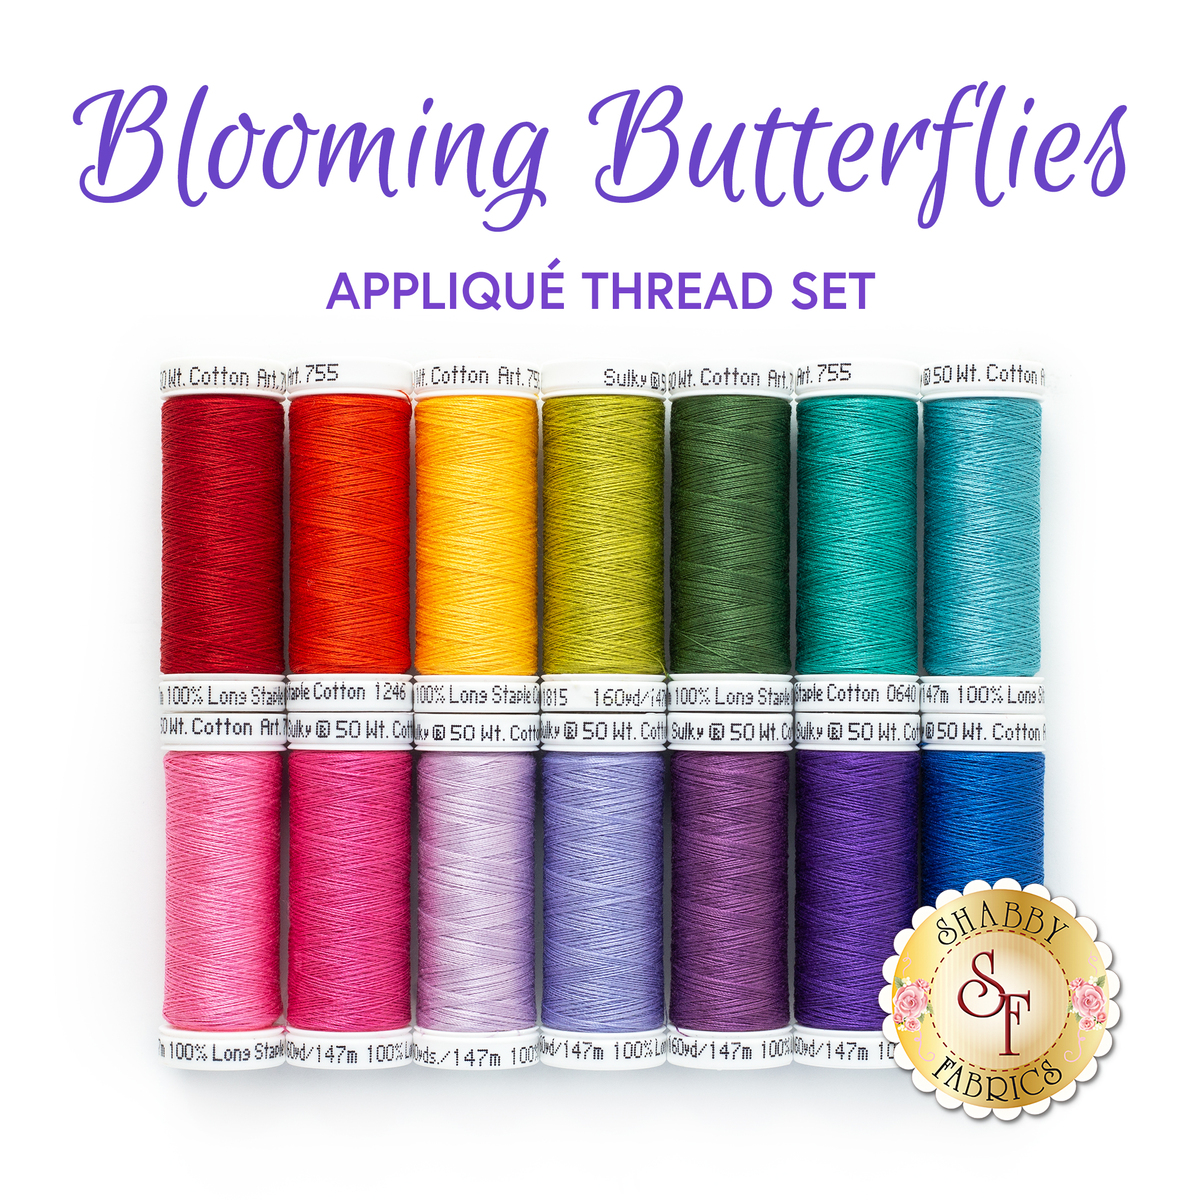 Color by Number with Markers Kits bloomin' butterflies (pack of 2)